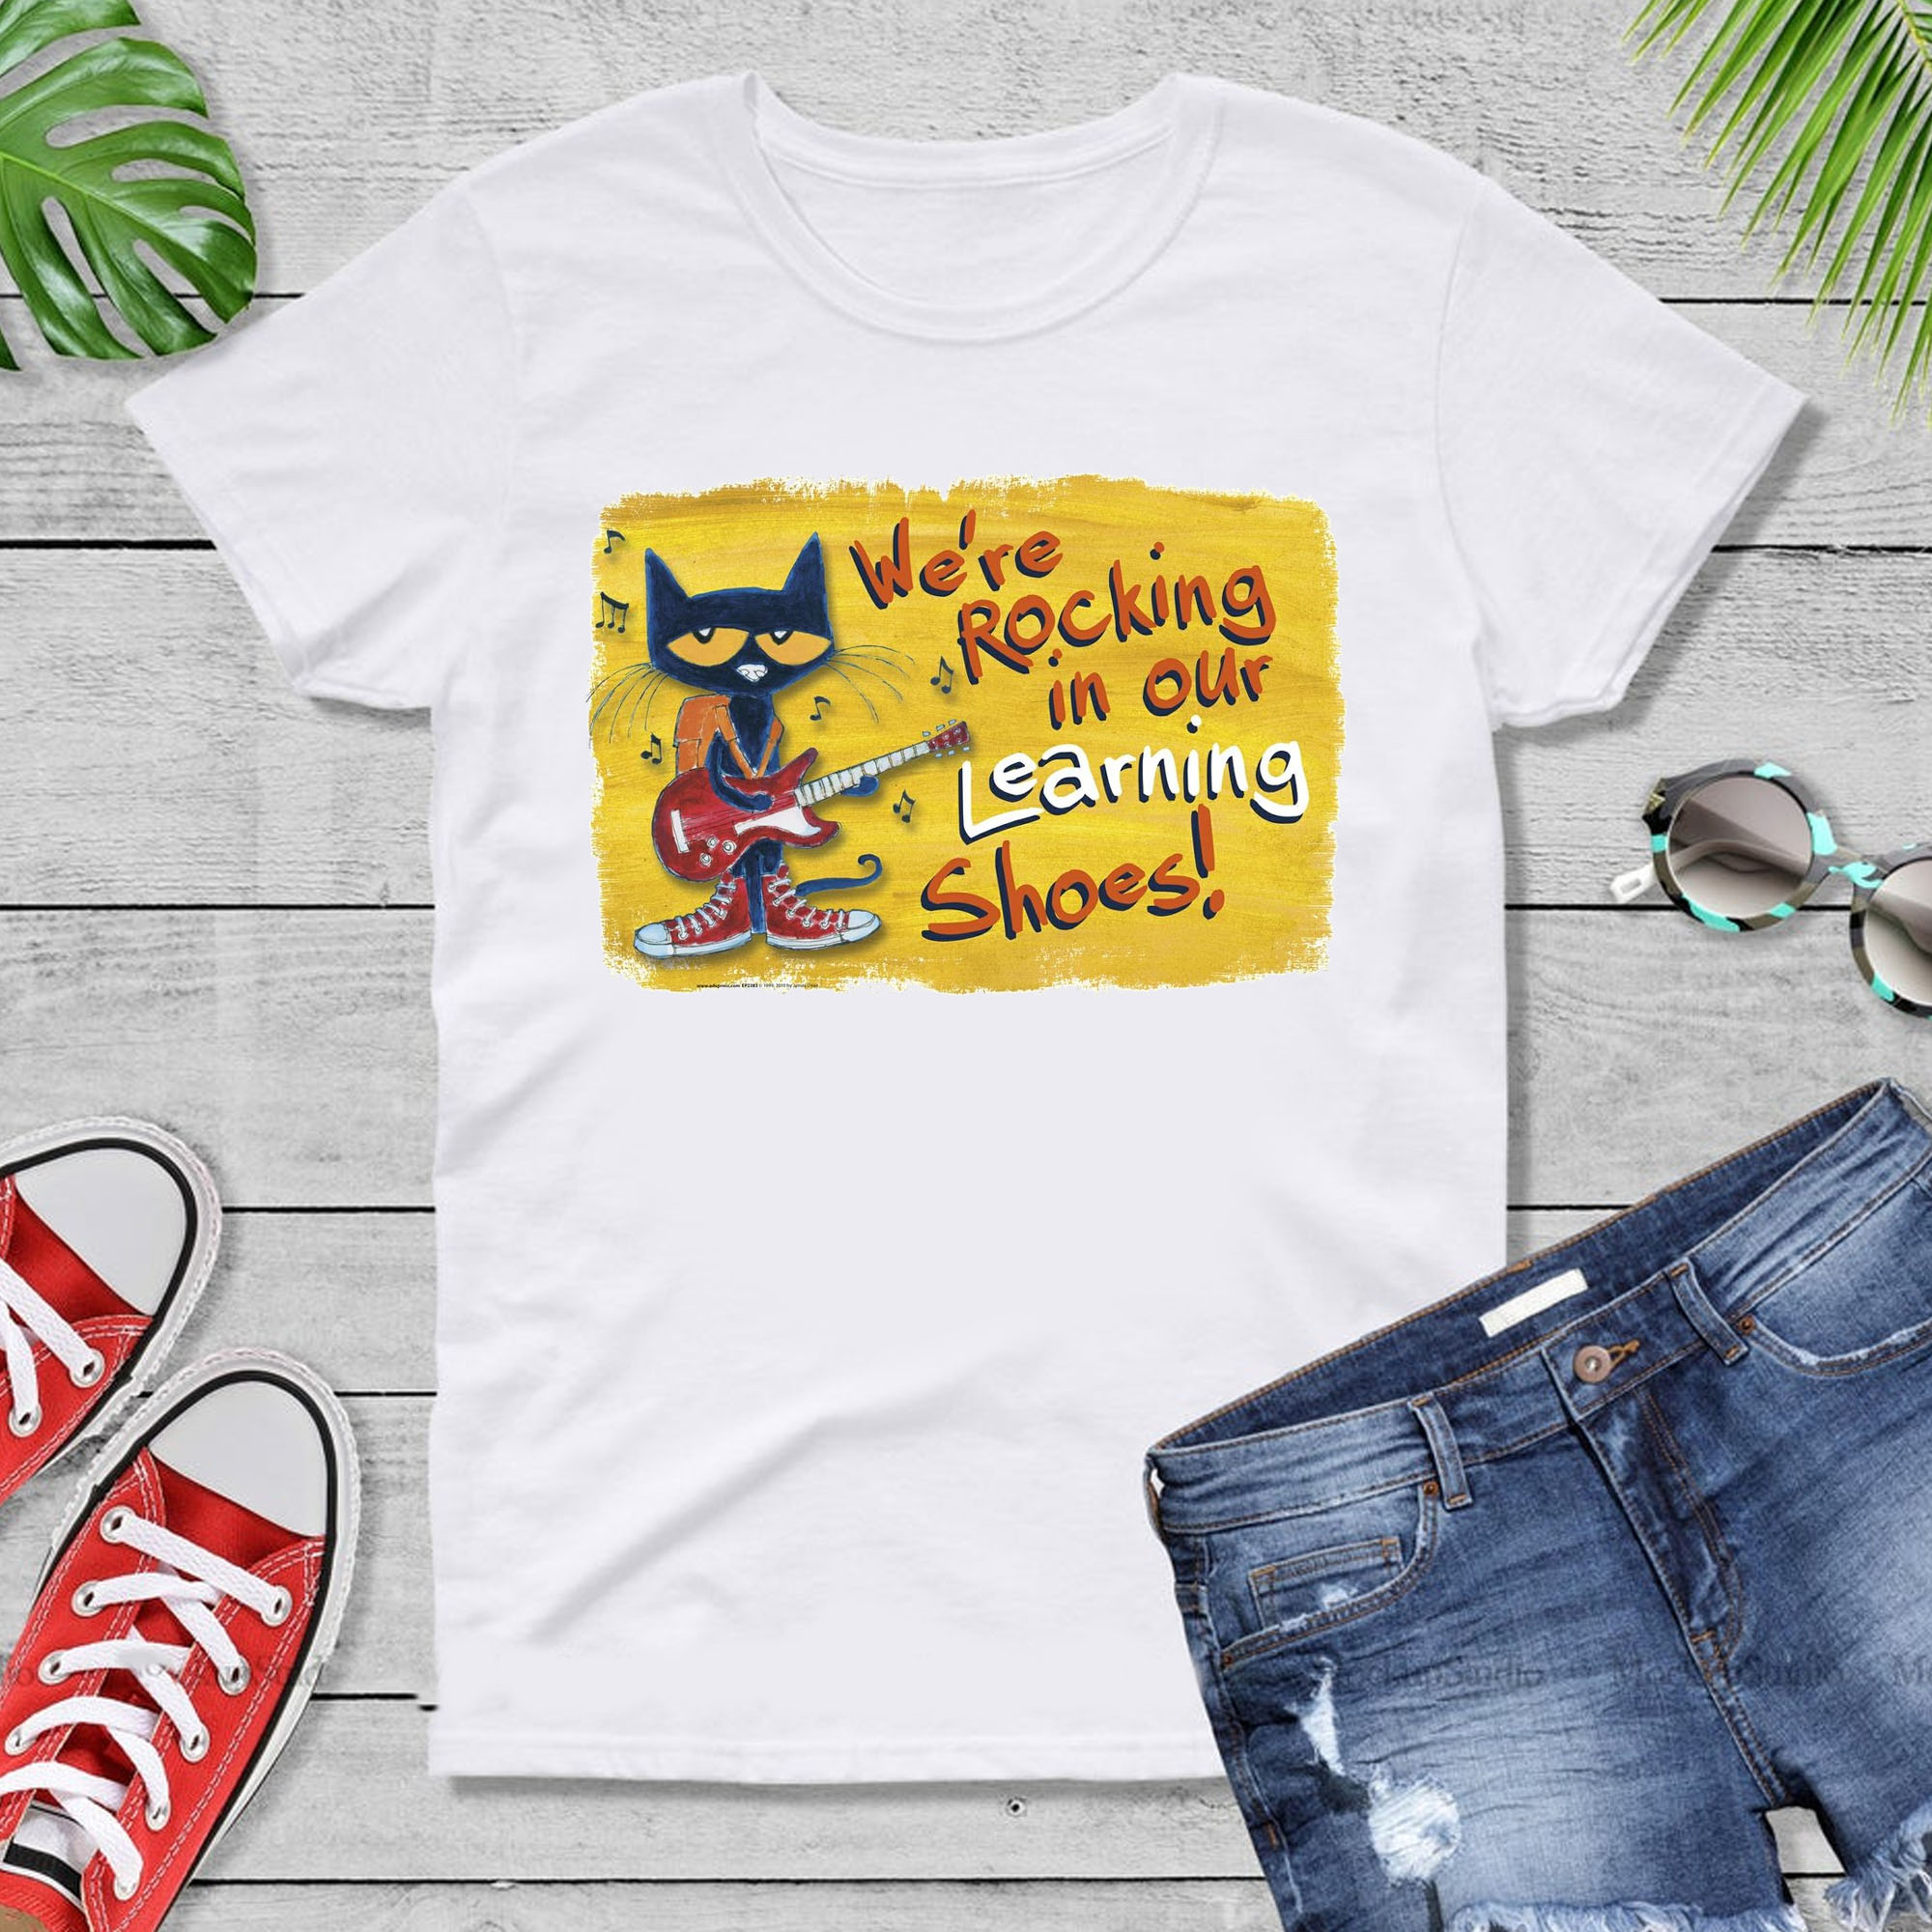 Pete The Cat Shirt, We're Rocking In Out Learning Shoes Shirt